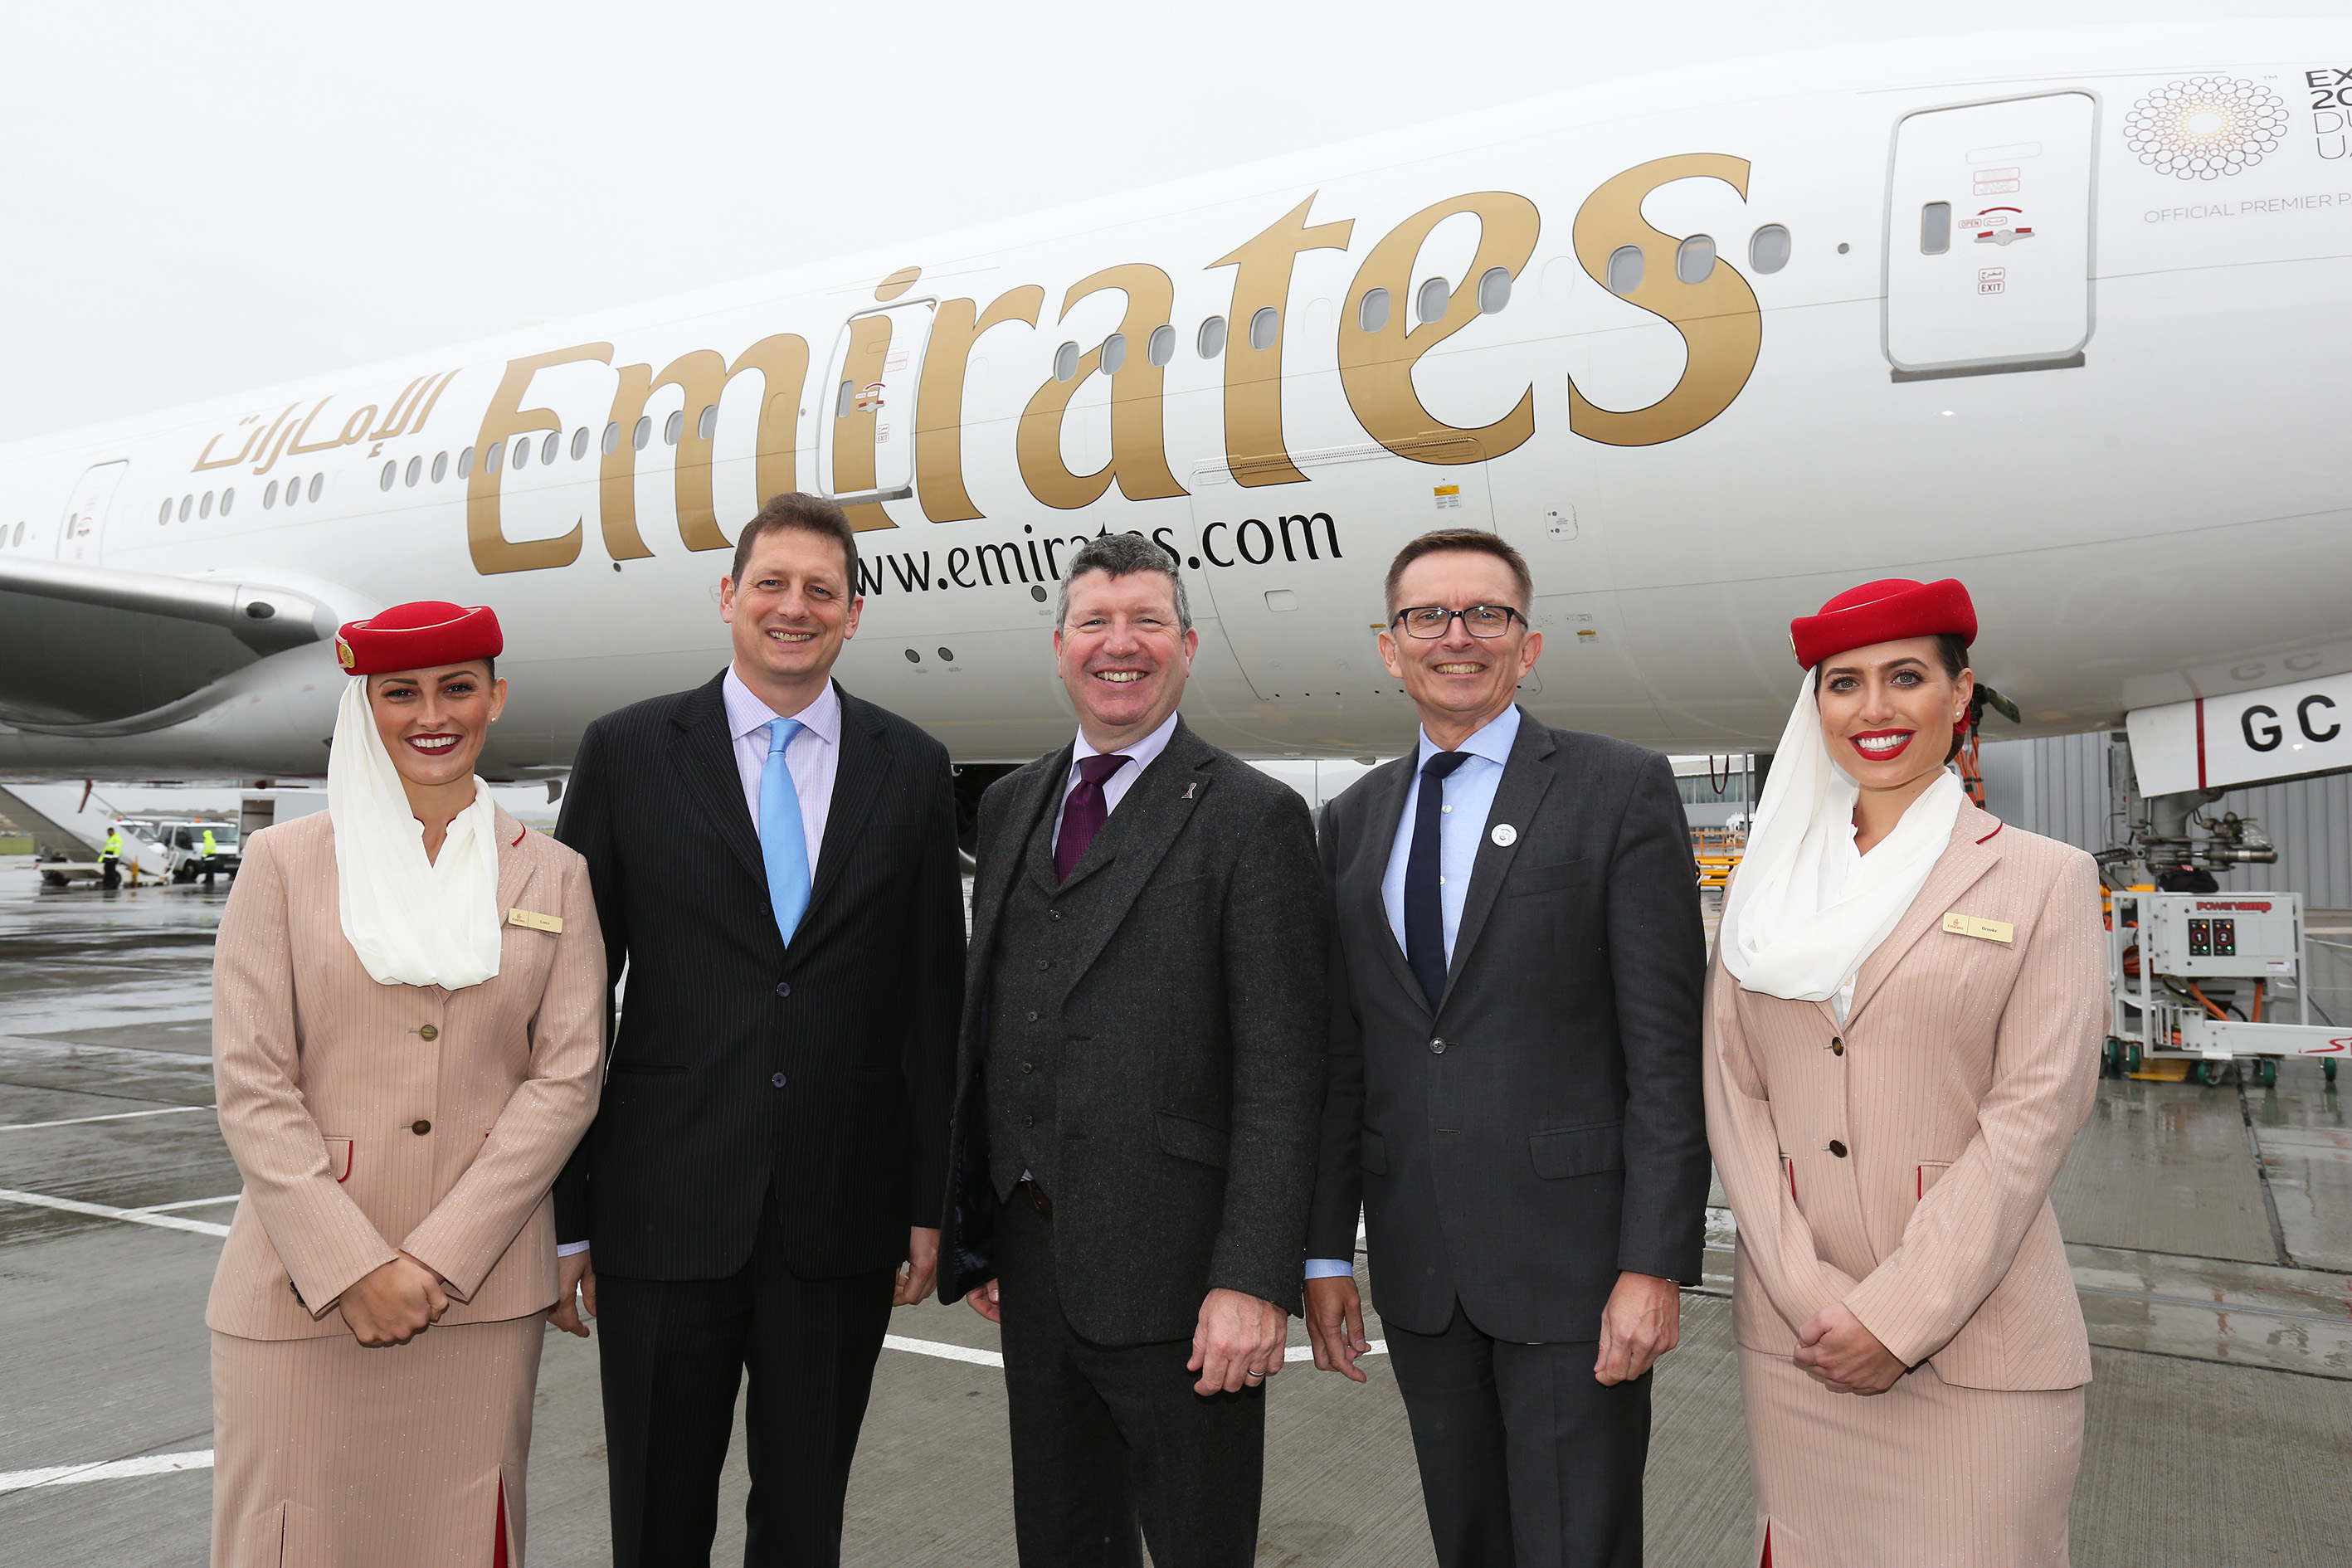 Richard Jewsbury, Emirates Divisional Vice President, UK, (left), with Gordon Dewar, Chief Executive of Edinburgh Airport, and Hubert Frach, Emirates Divisional Senior Vice President, Commercial Operations West, flanked by Emirates cabin crew.